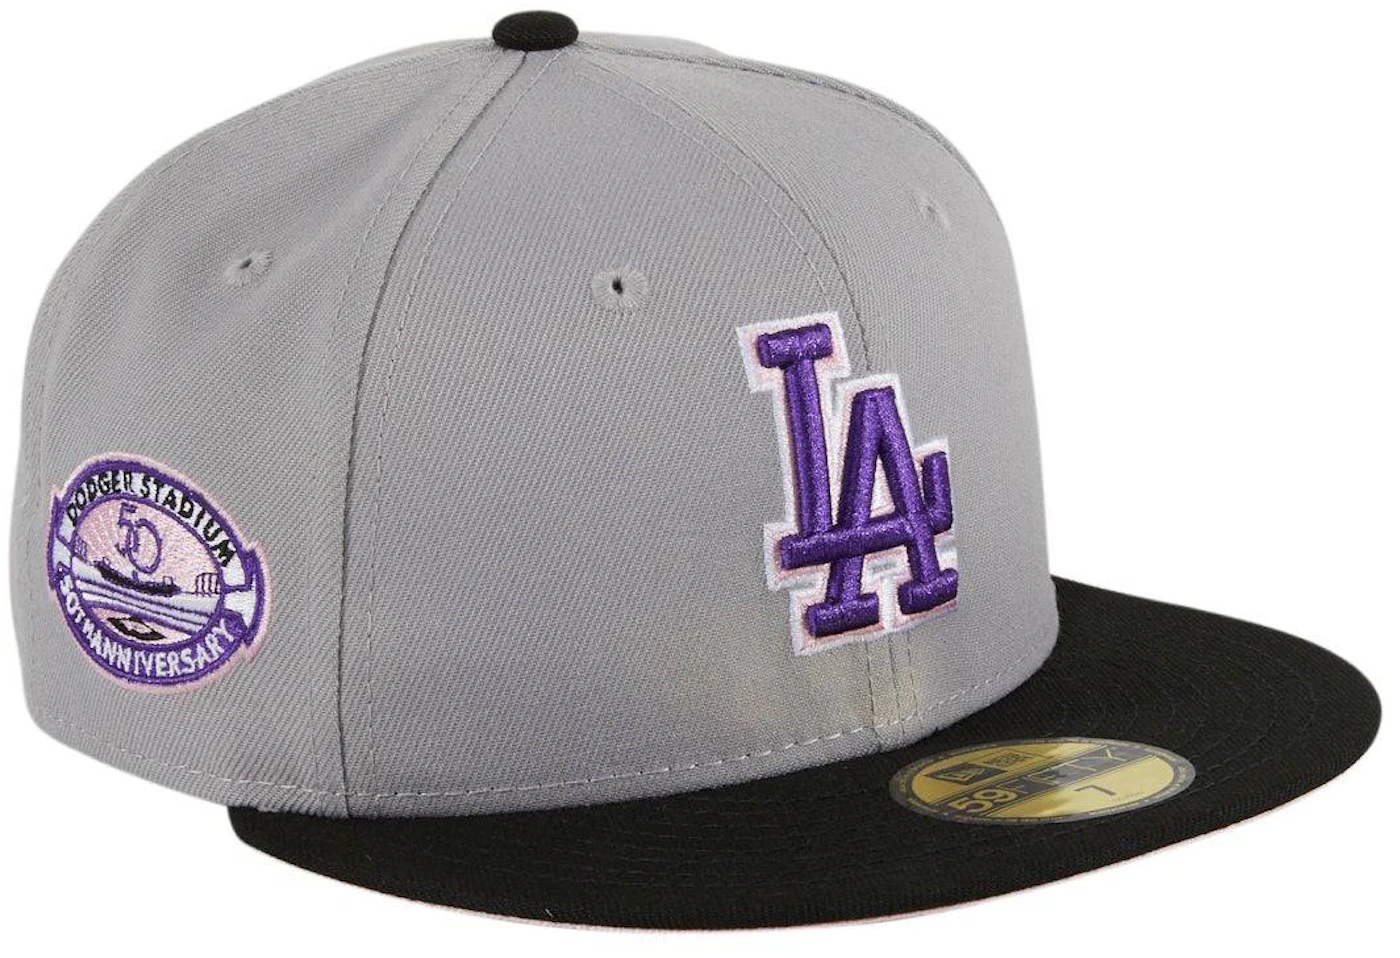 New Era Los Angeles Dodgers Fuji 50th Anniversary Stadium Patch Hat Club Exclusive 59FIFTY Fitted Hat Grey/Black